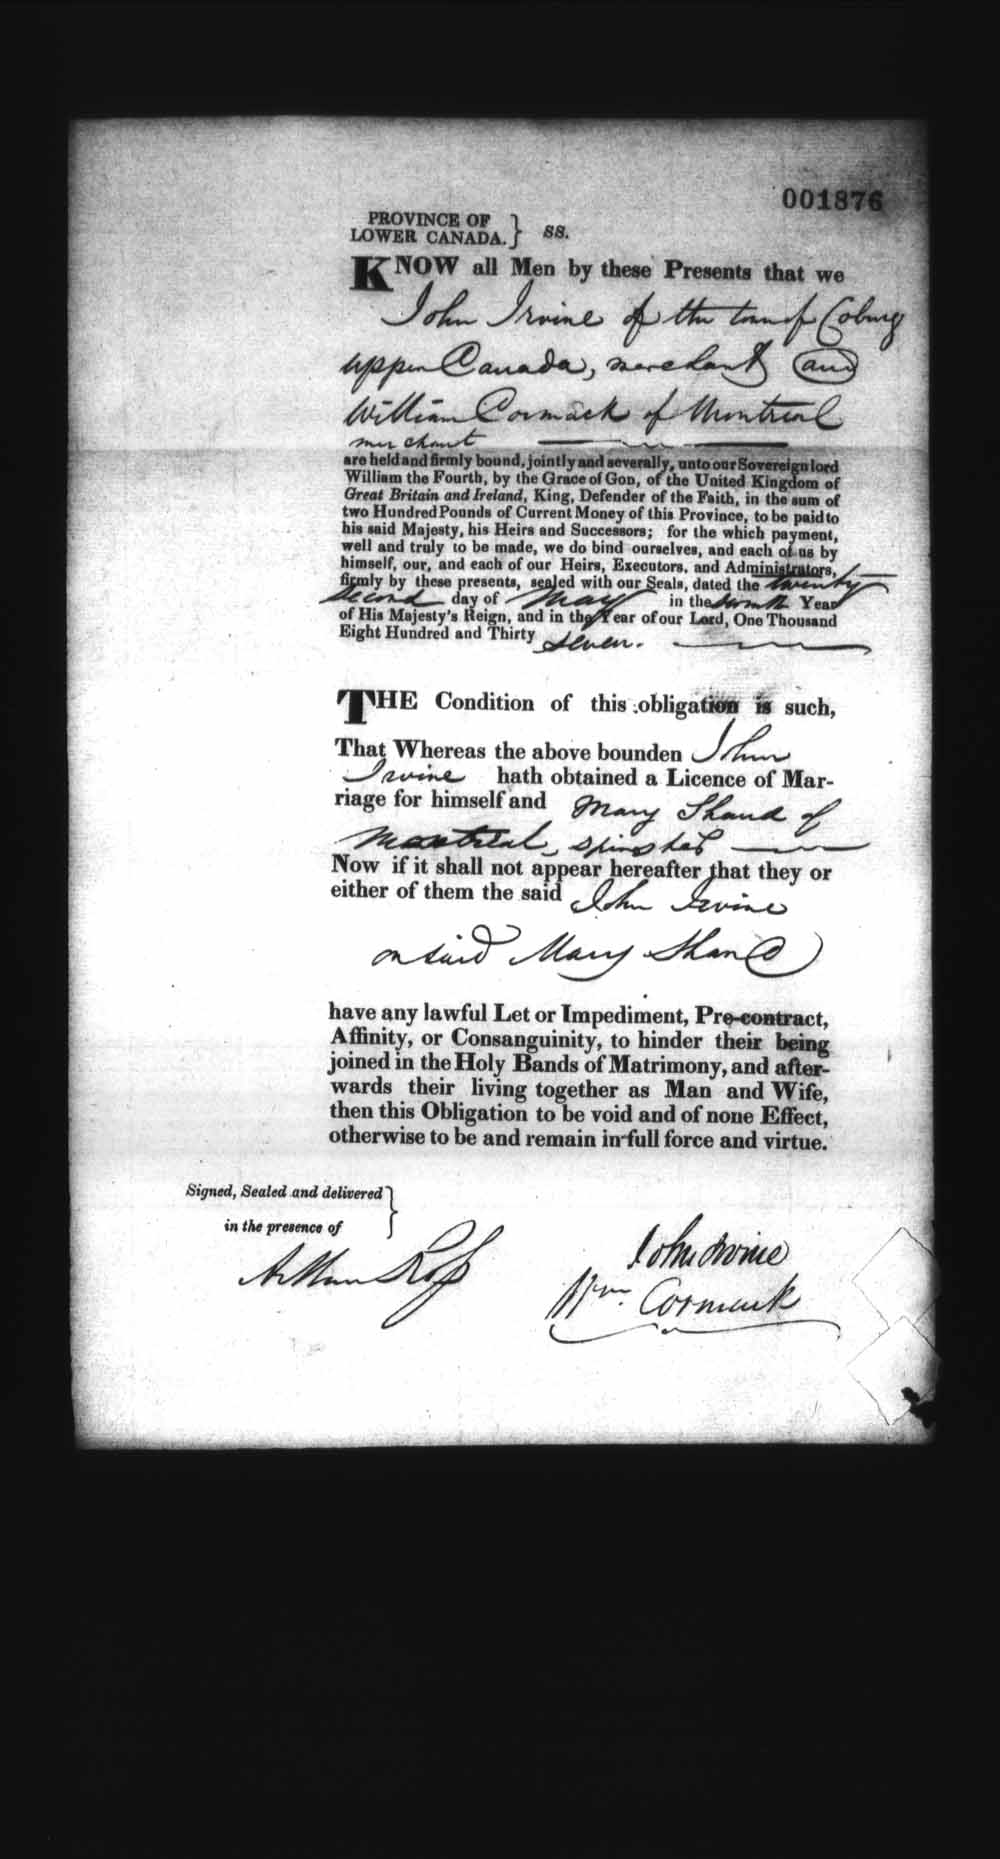 Digitized page of Upper and Lower Canada Marriage Bonds (1779-1865) for Image No.: e008238210